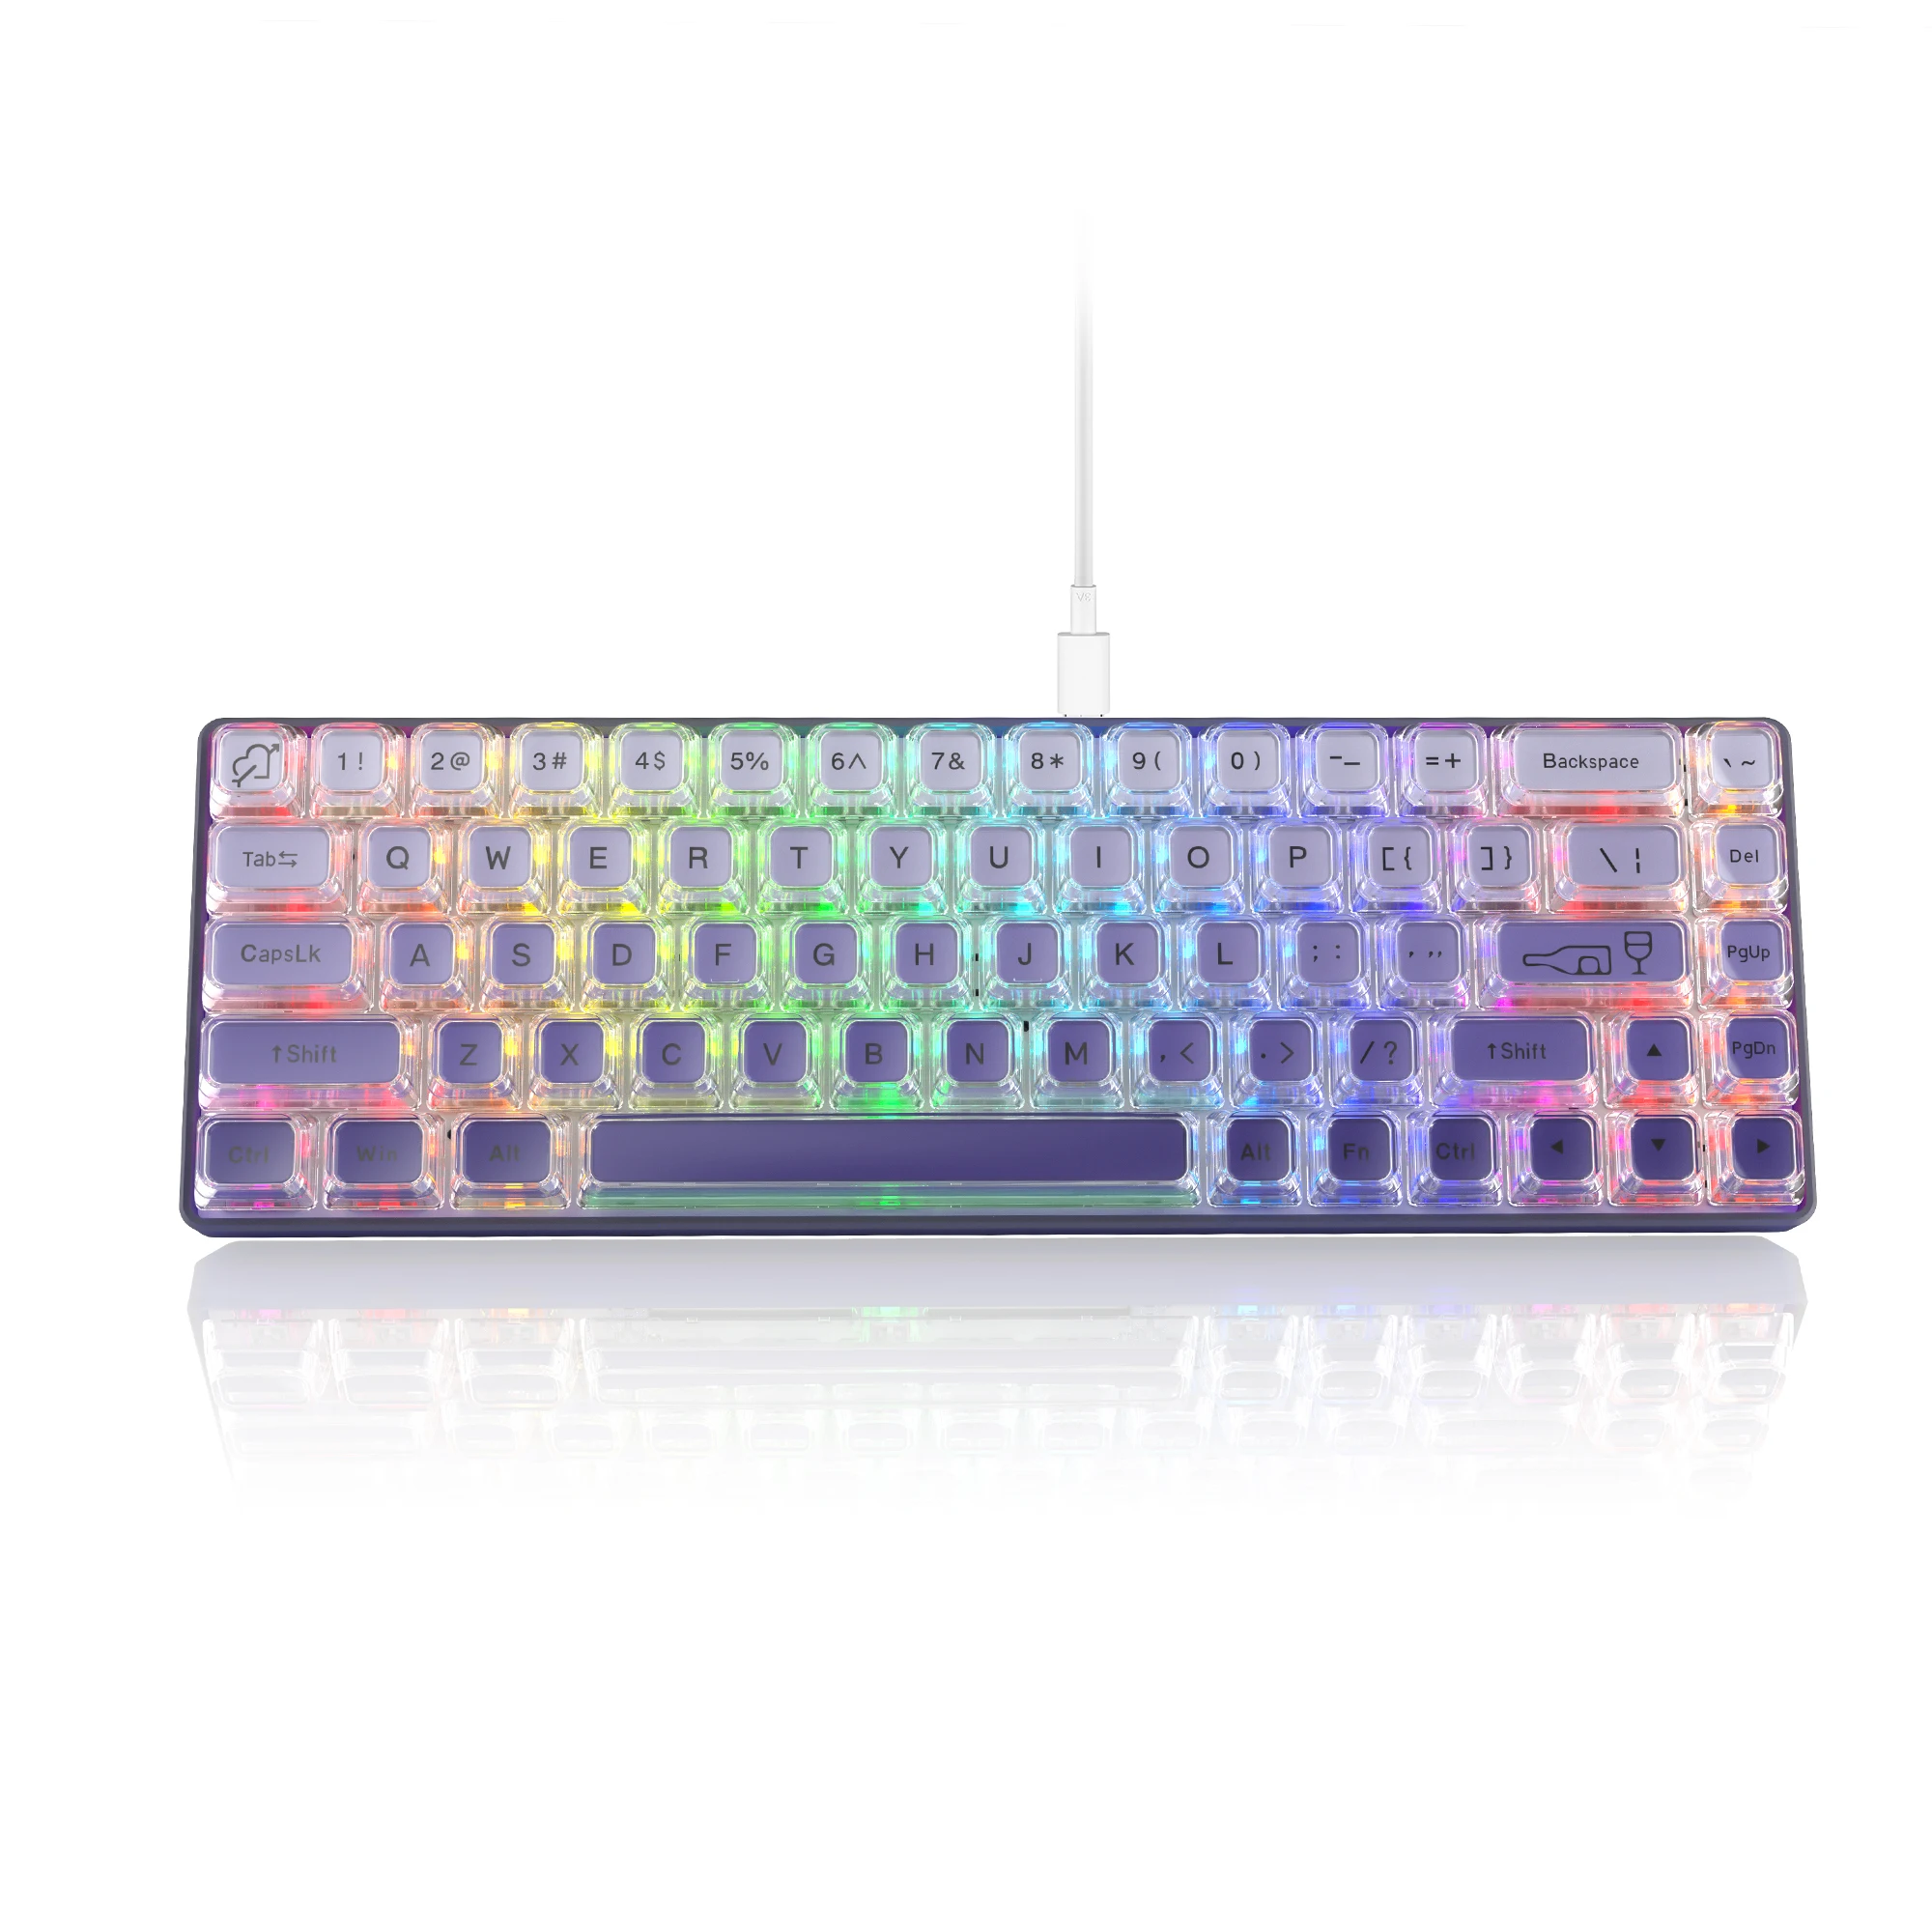 

Womier WK68 60% Keyboard Hot-Swappable Purple Keyboard RGB Wire Gaming Mechanical Keyboard Pudding PBT Keycap Red Switch